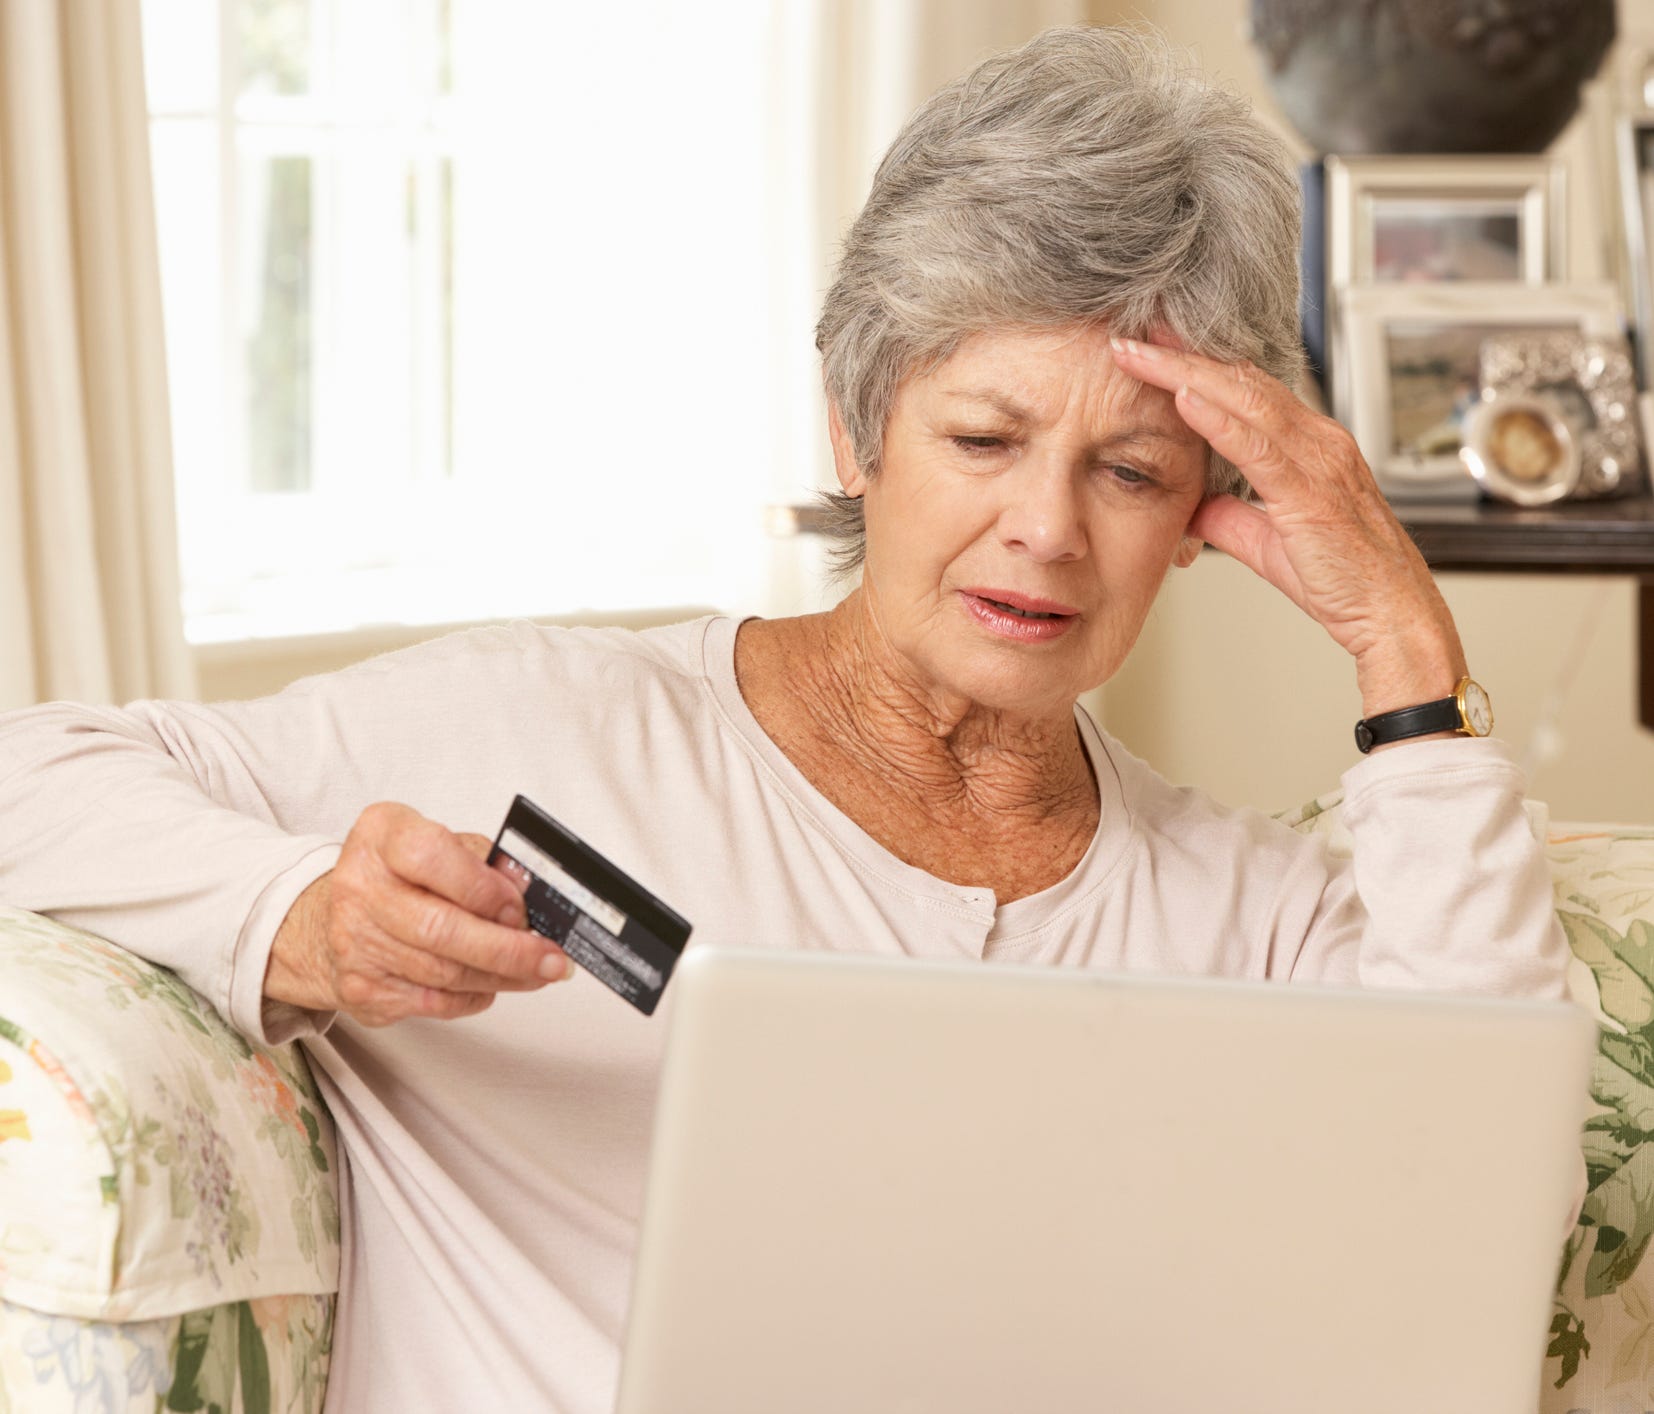 If you're a senior struggling with credit card debt like Green, you're not alone. In 2012, for the first time, middle-income households headed by someone over 50 years old carried more credit card debt on average than households of people younger tha